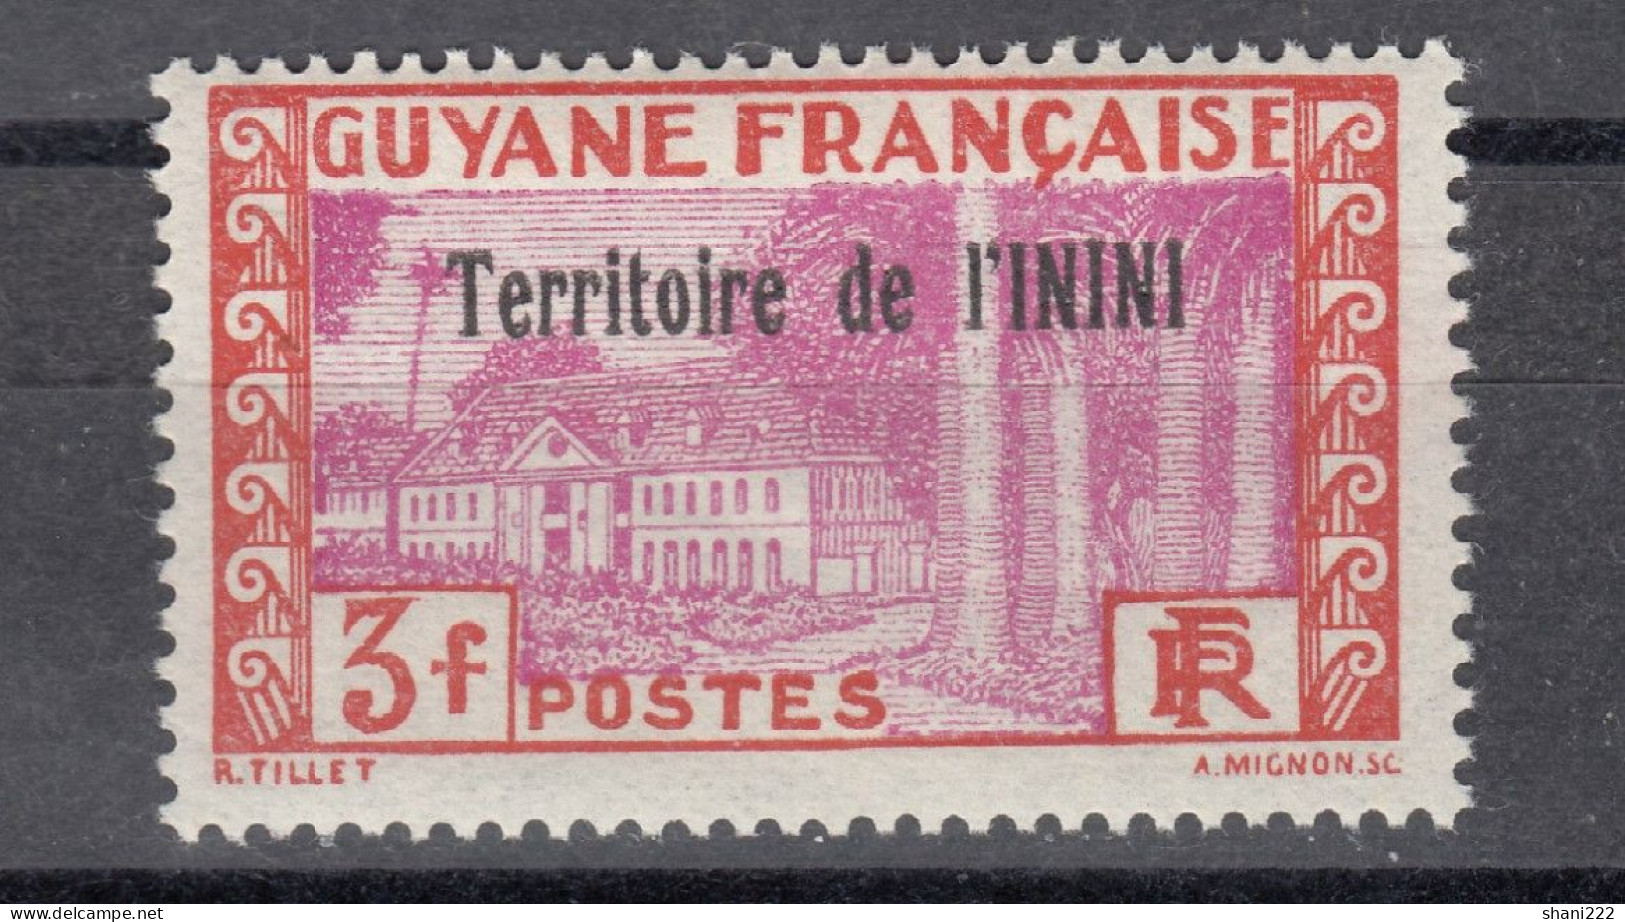 Inini, 1932 - Government House - 3 Fr. Value  MH (e-82) - Unused Stamps